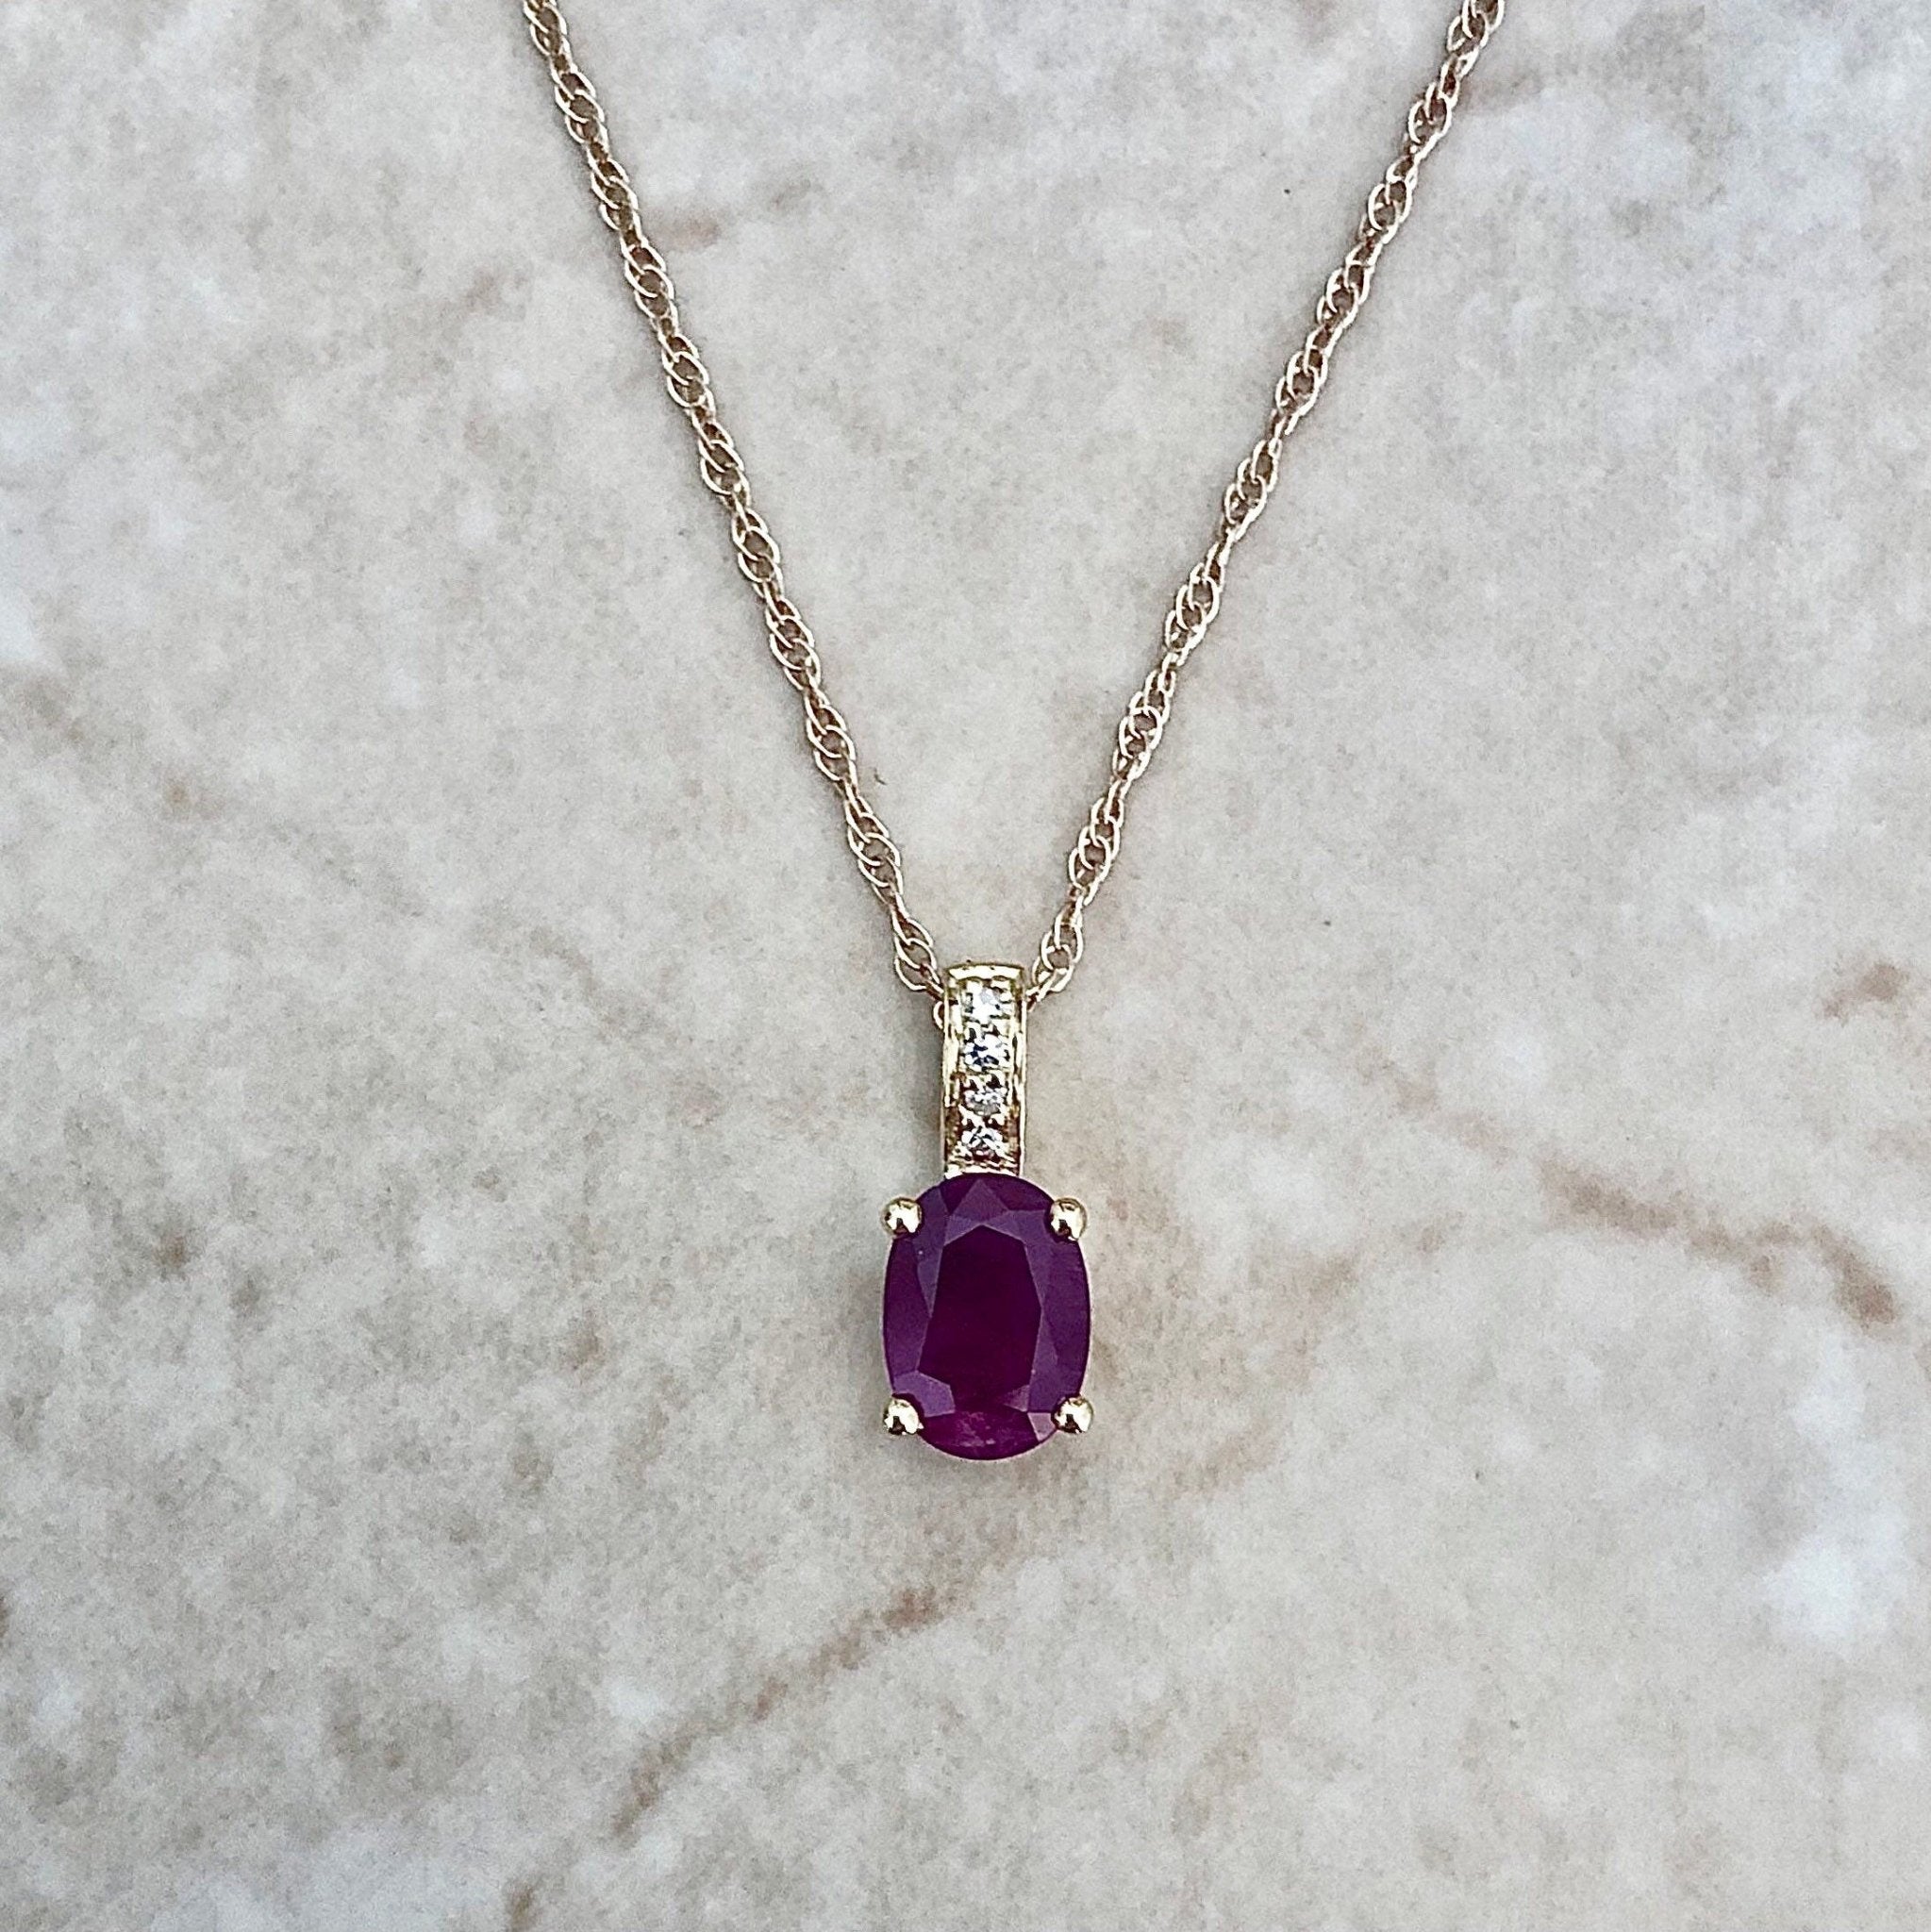 14kt Gold Ruby Necklace, Ruby Pendant, Ruby Teardrop Necklace, July  Birthstone Necklace, Gift for Her - Etsy